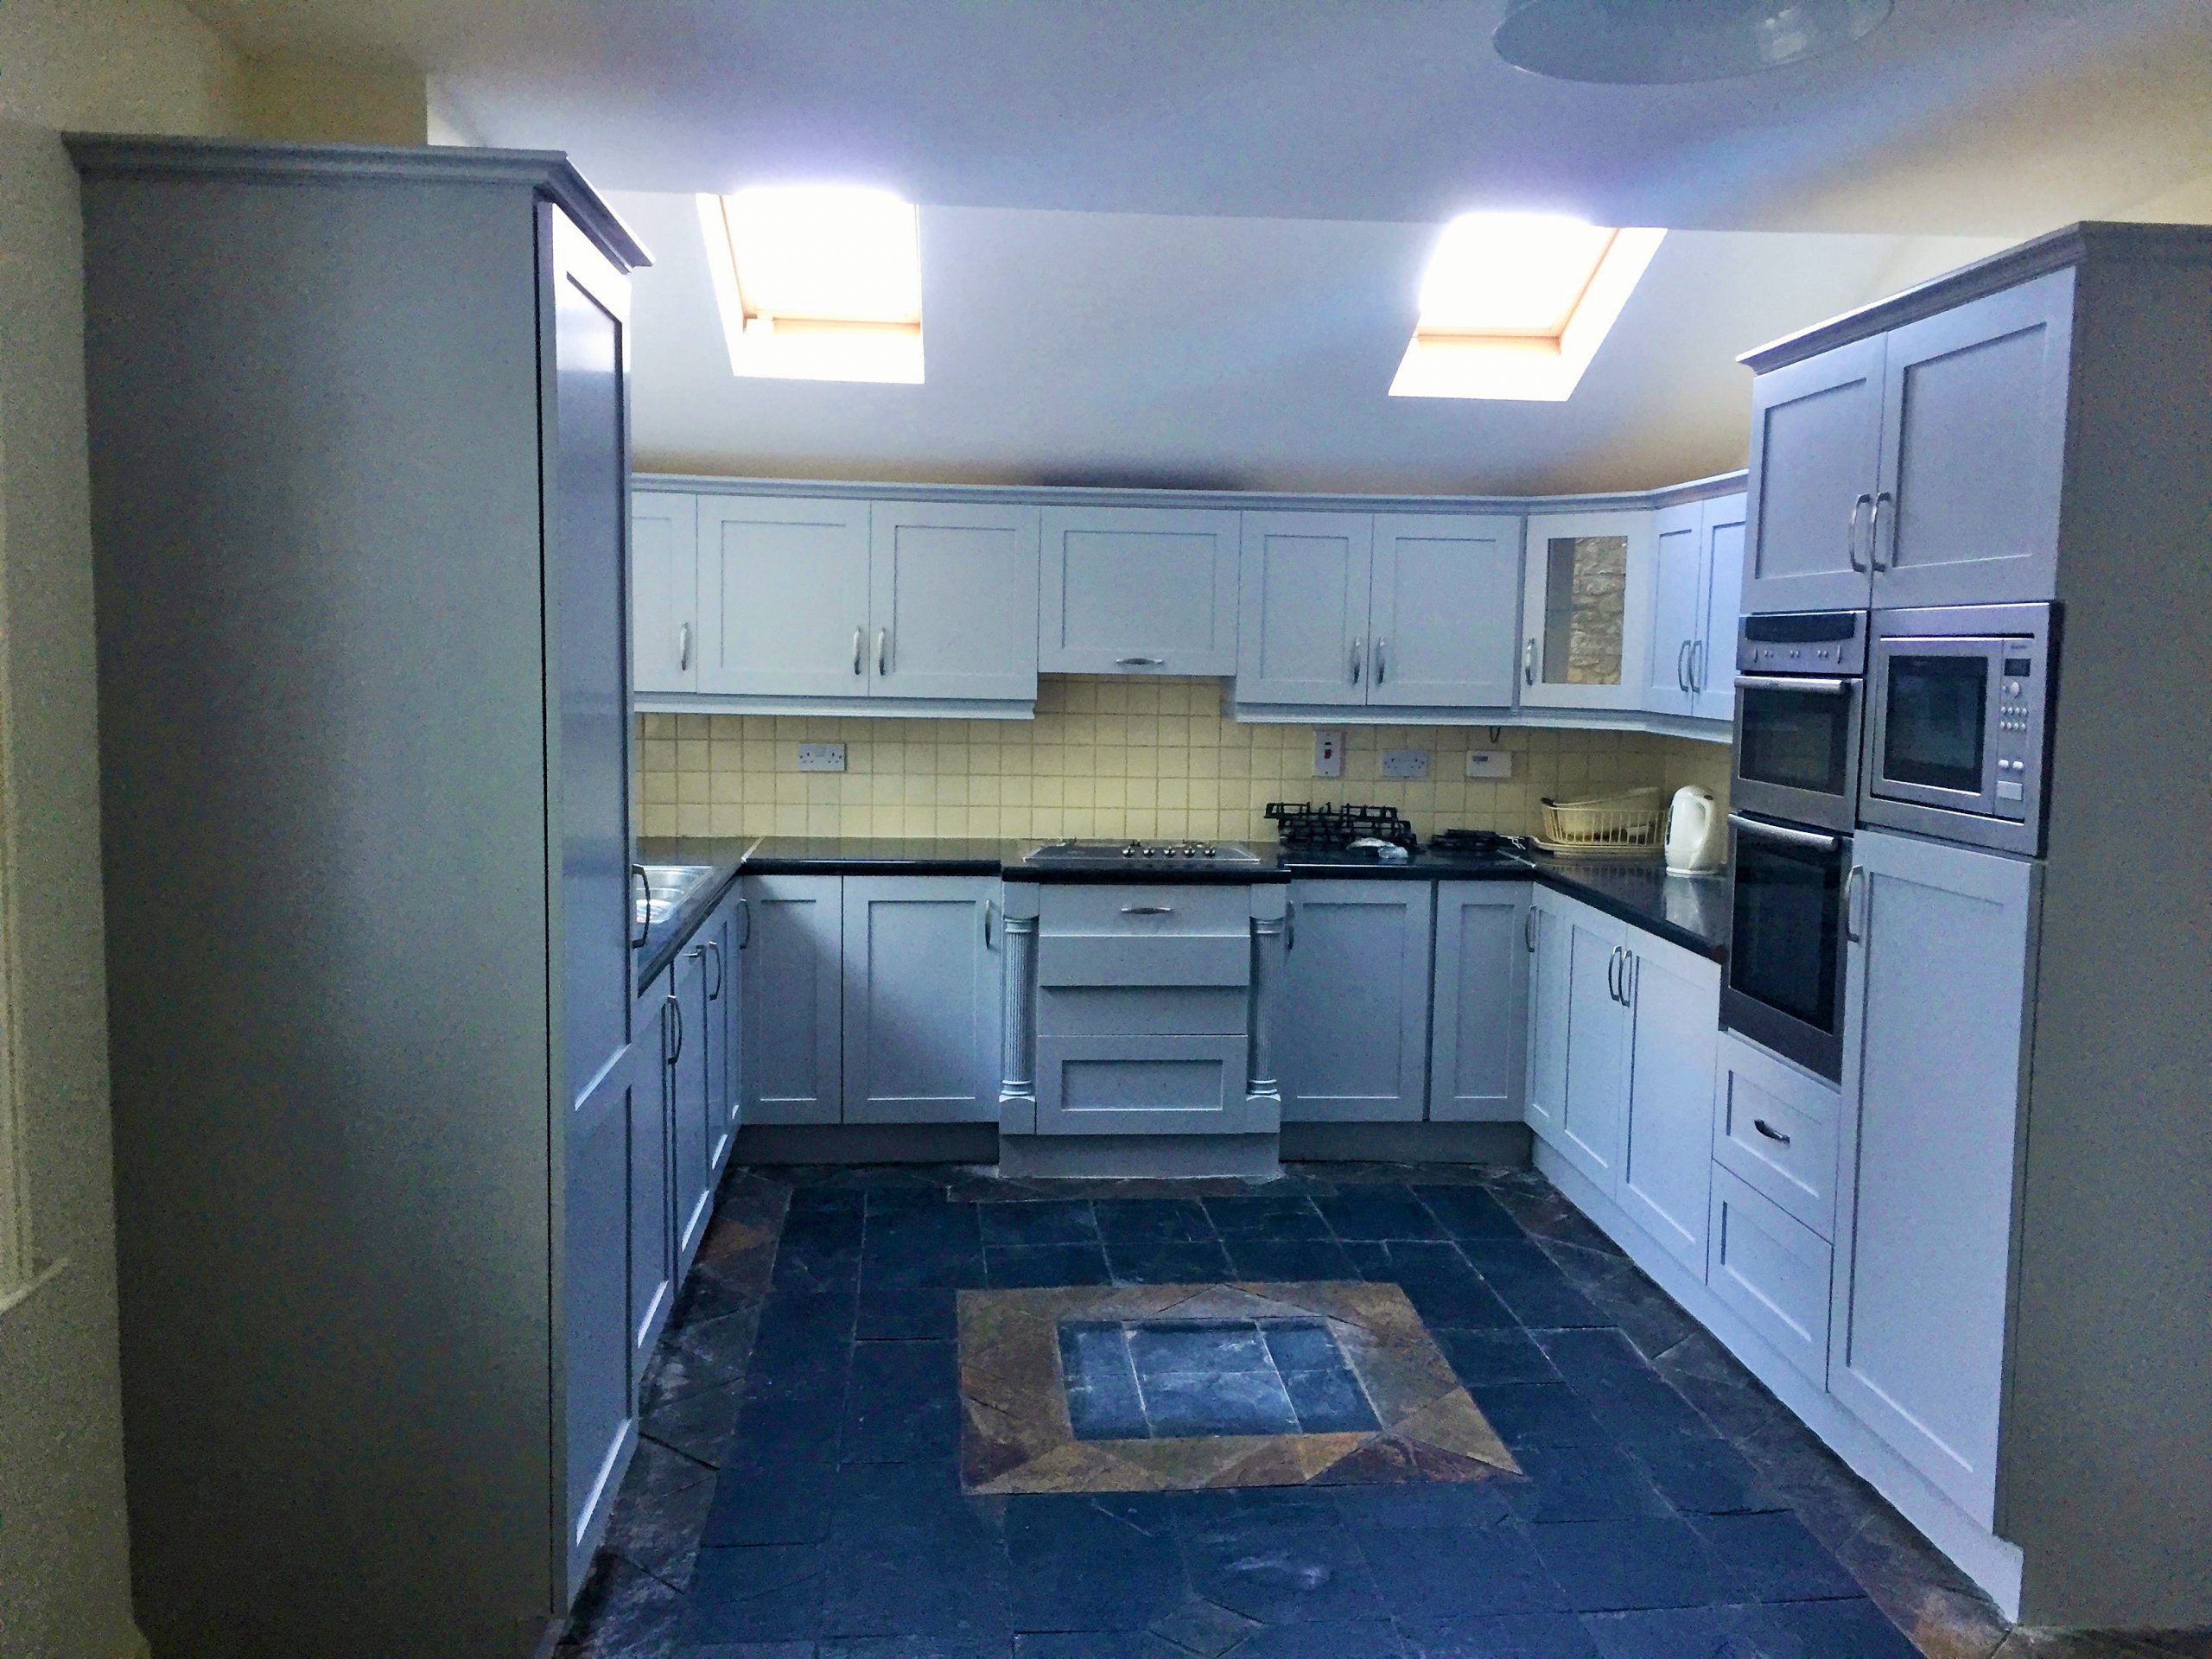 How to paint a laminated surfaces - after photo of a laminated kitchen we painted in Sandycove by Impressions Painting and Decorating